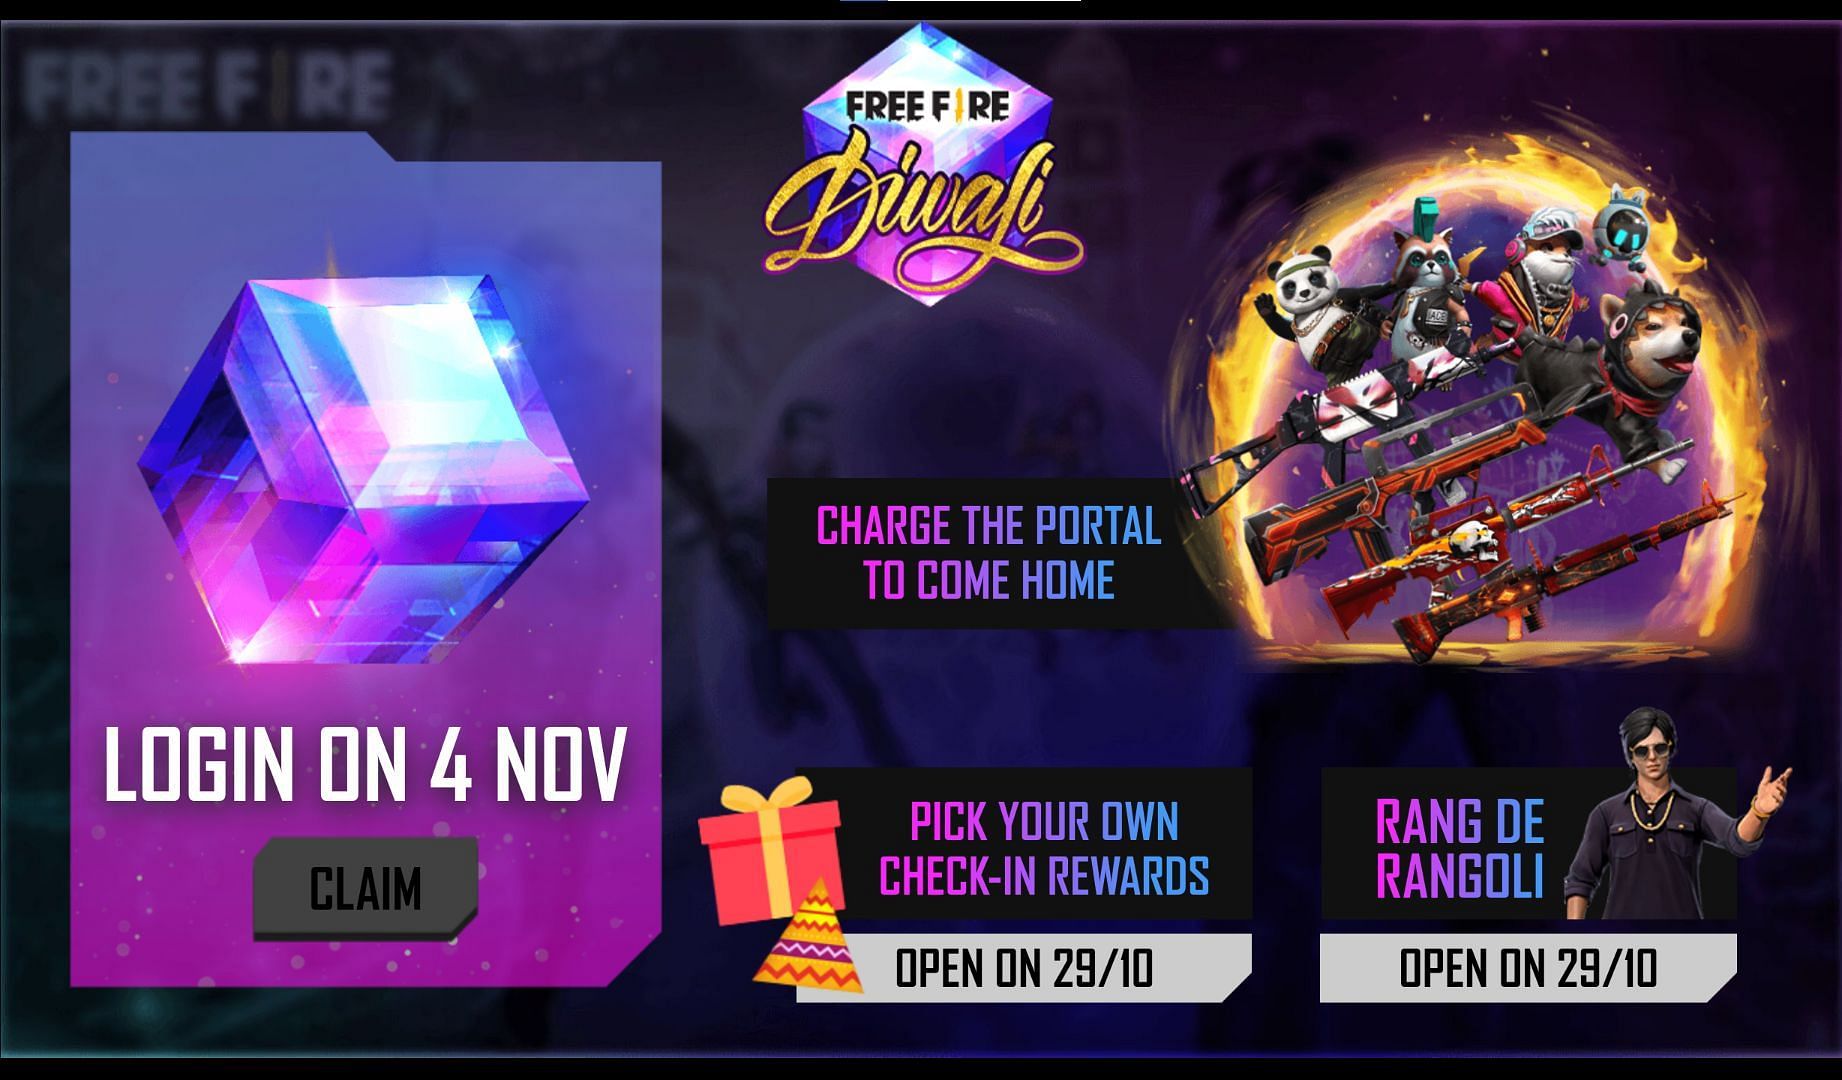 A Free Magic Cube will be available to the users (Image via Free Fire)